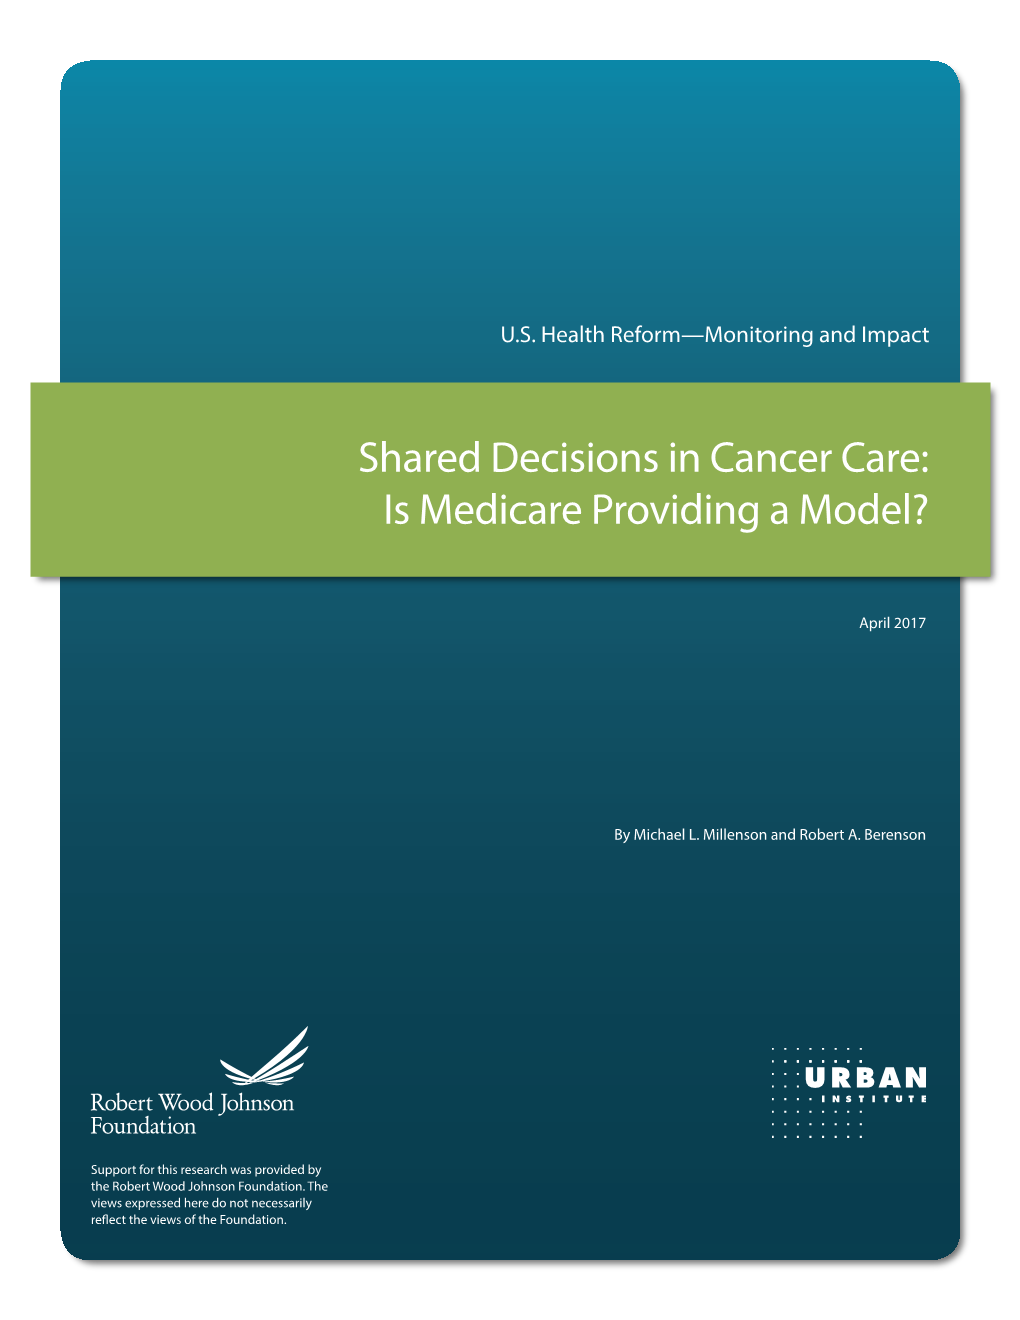 Shared Decisions in Cancer Care: Is Medicare Providing a Model?